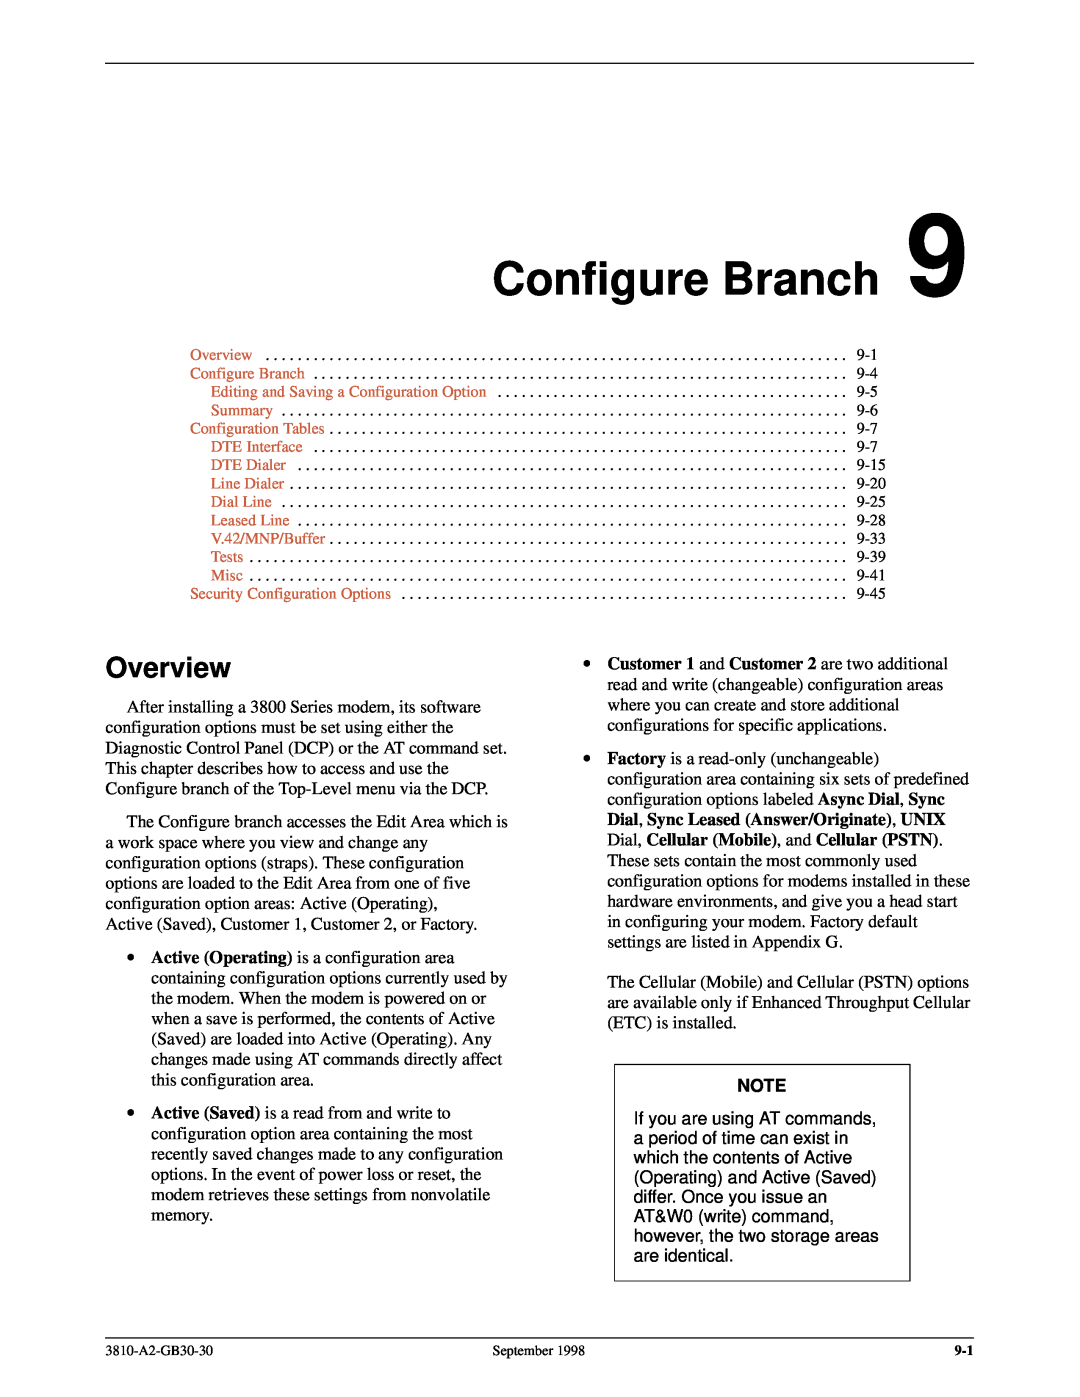 Paradyne 3800 manual Configure Branch, Overview 